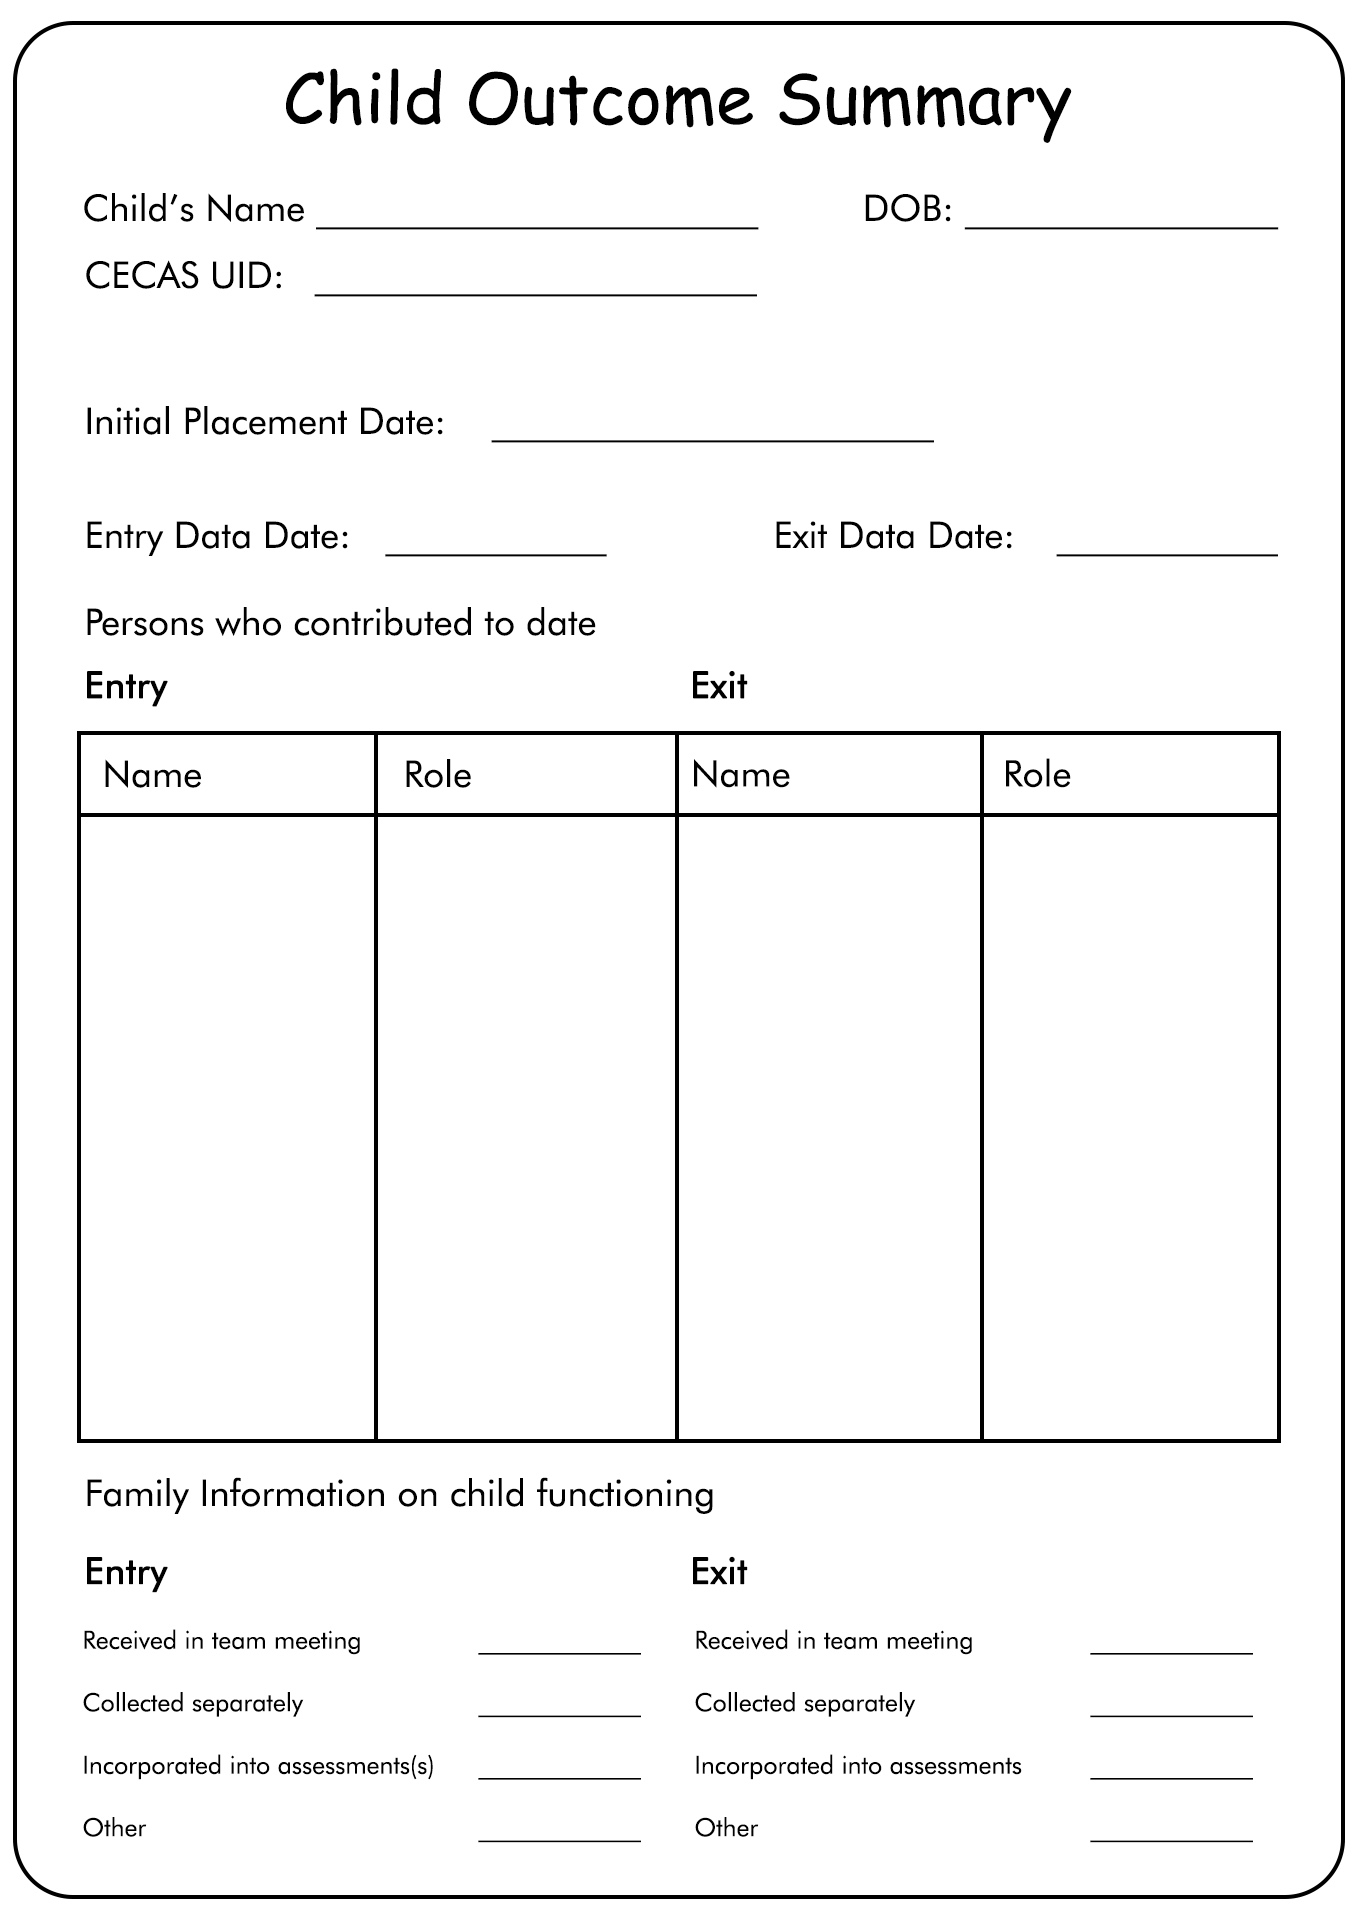 Child Outcome Summary Form Example